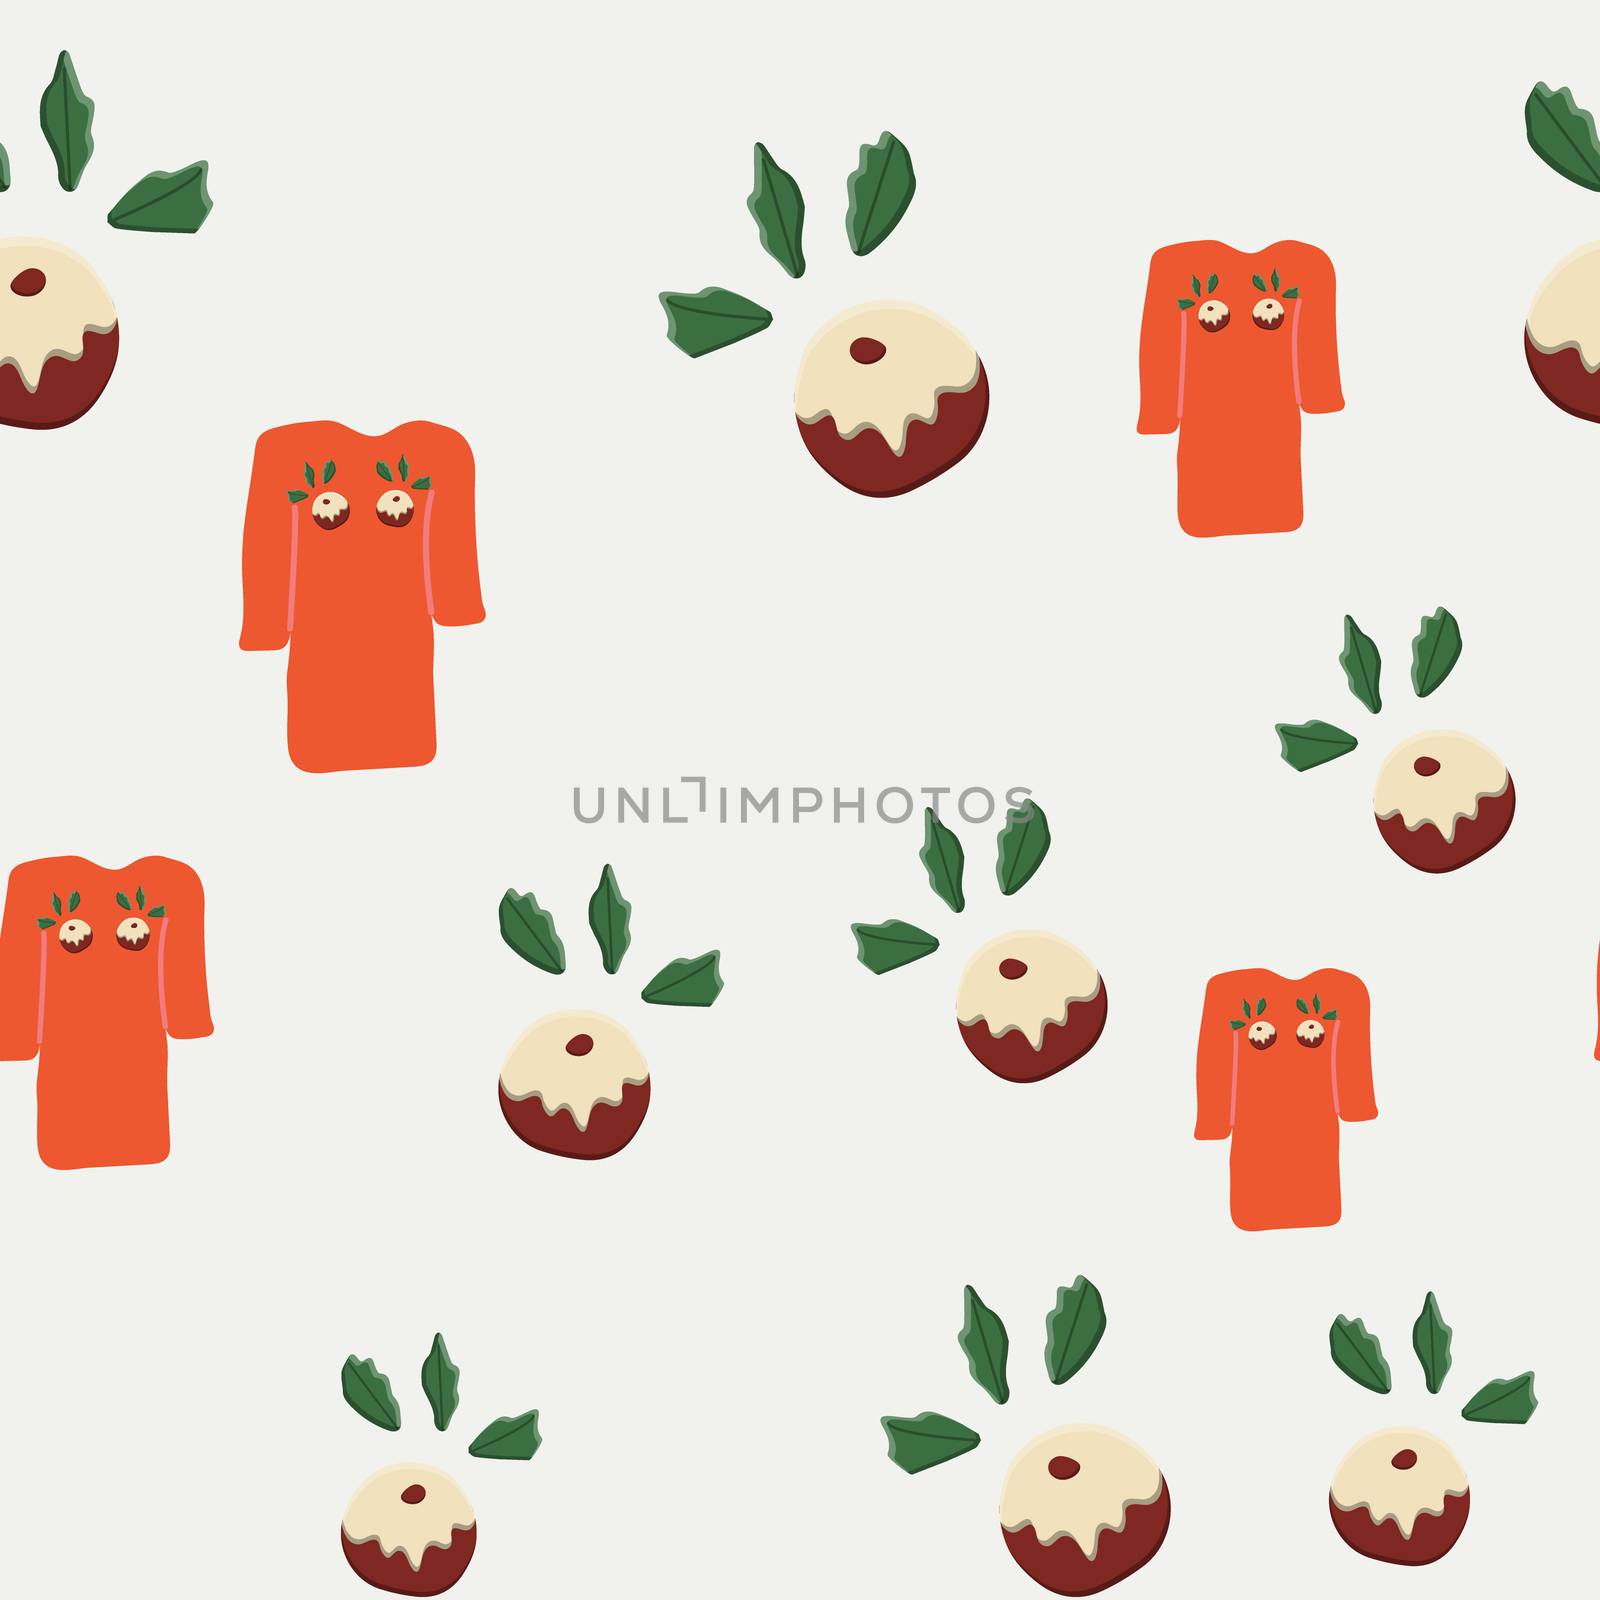 Orange ugly sweater with Christmas pudding seamless pattern. Festive knitted jumper endless design. Holiday decor, winter knitted woolen clothes. Colorful vector illustration in flat cartoon style.